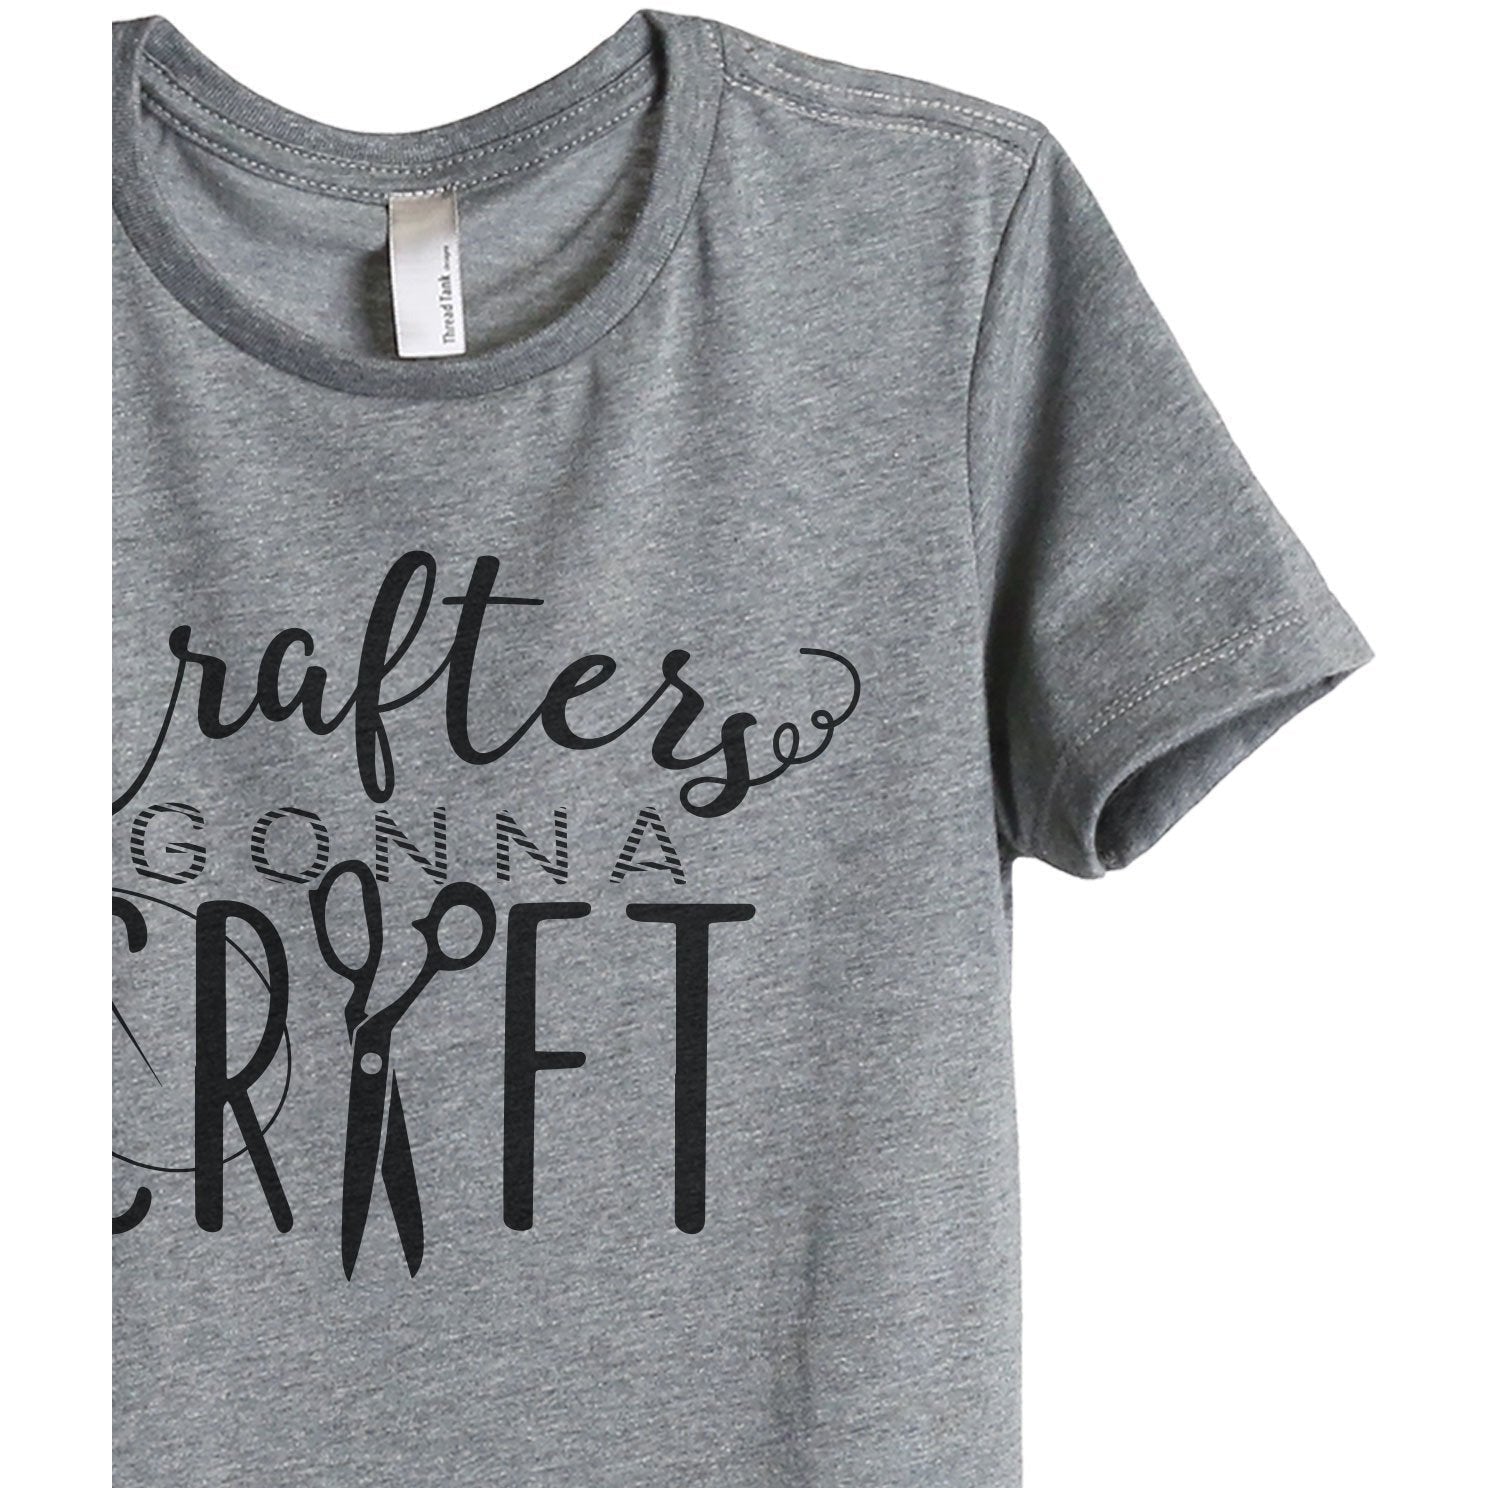 Crafters Gonna Craft Women's Relaxed Crewneck T-Shirt Top Tee Heather Grey Zoom Details
